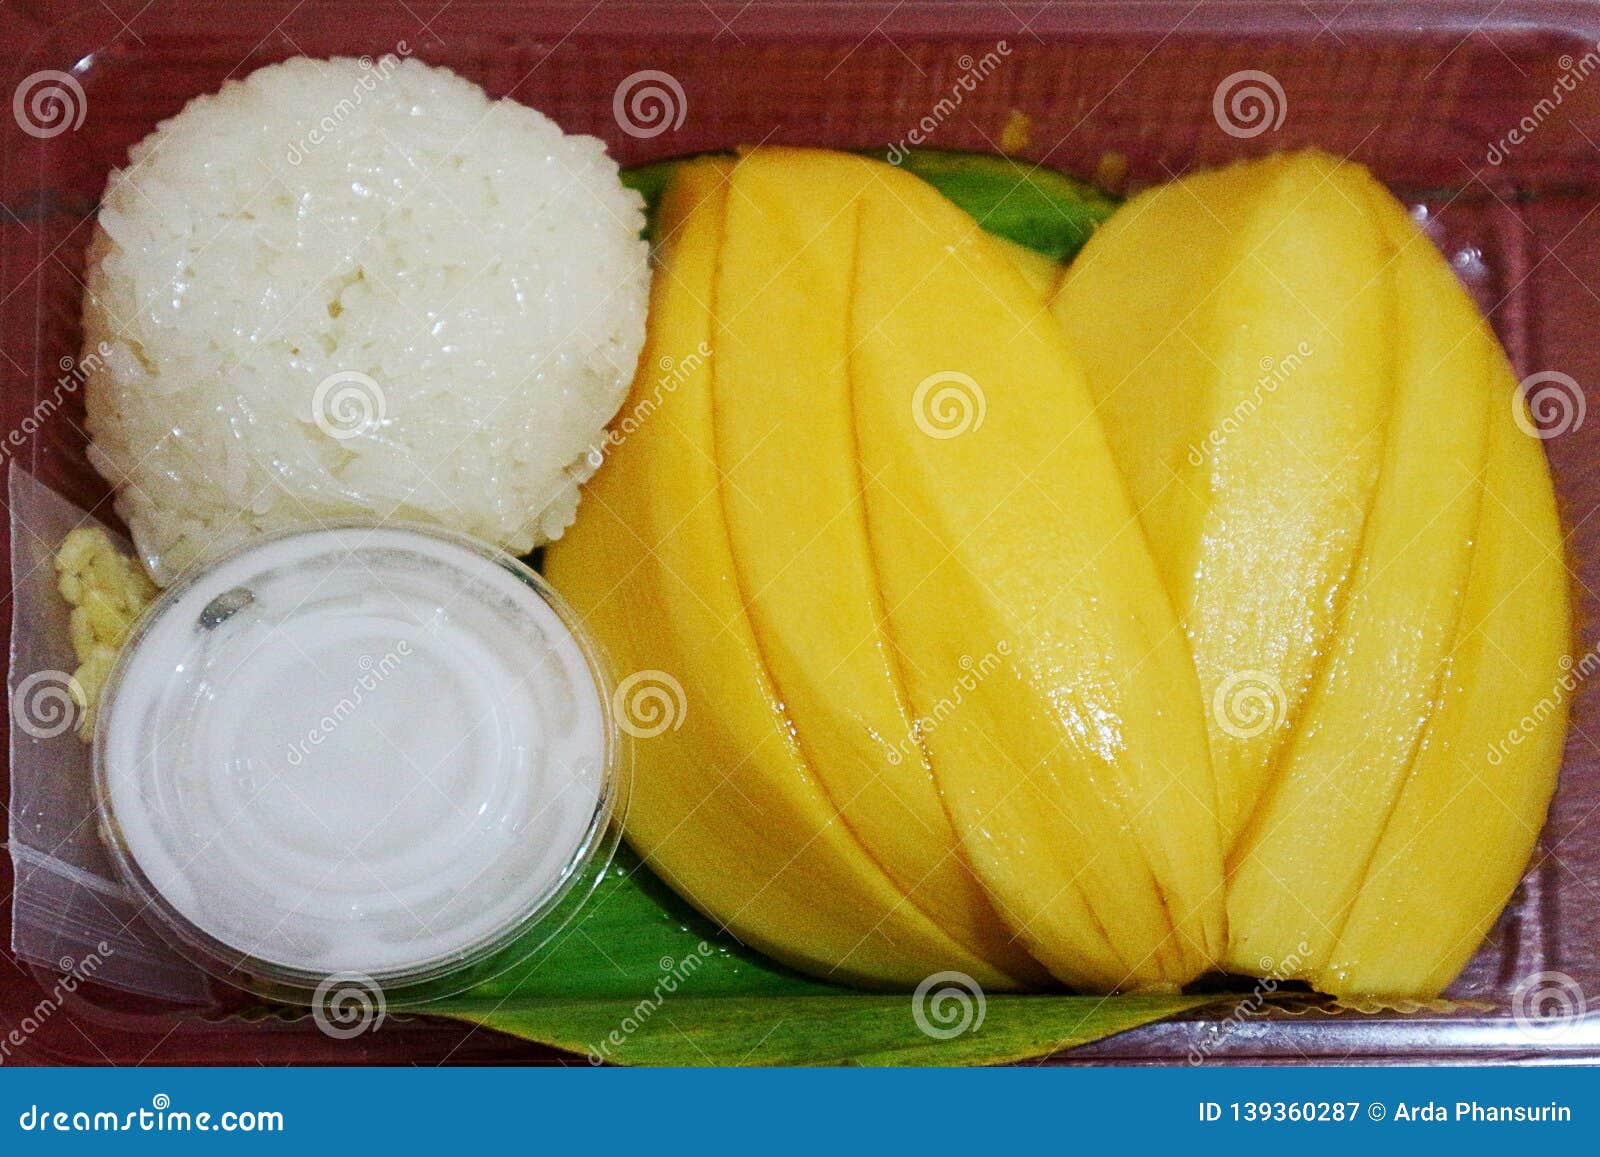 5 904 Package Rice Photos Free Royalty Free Stock Photos From Dreamstime,Baked Red Snapper